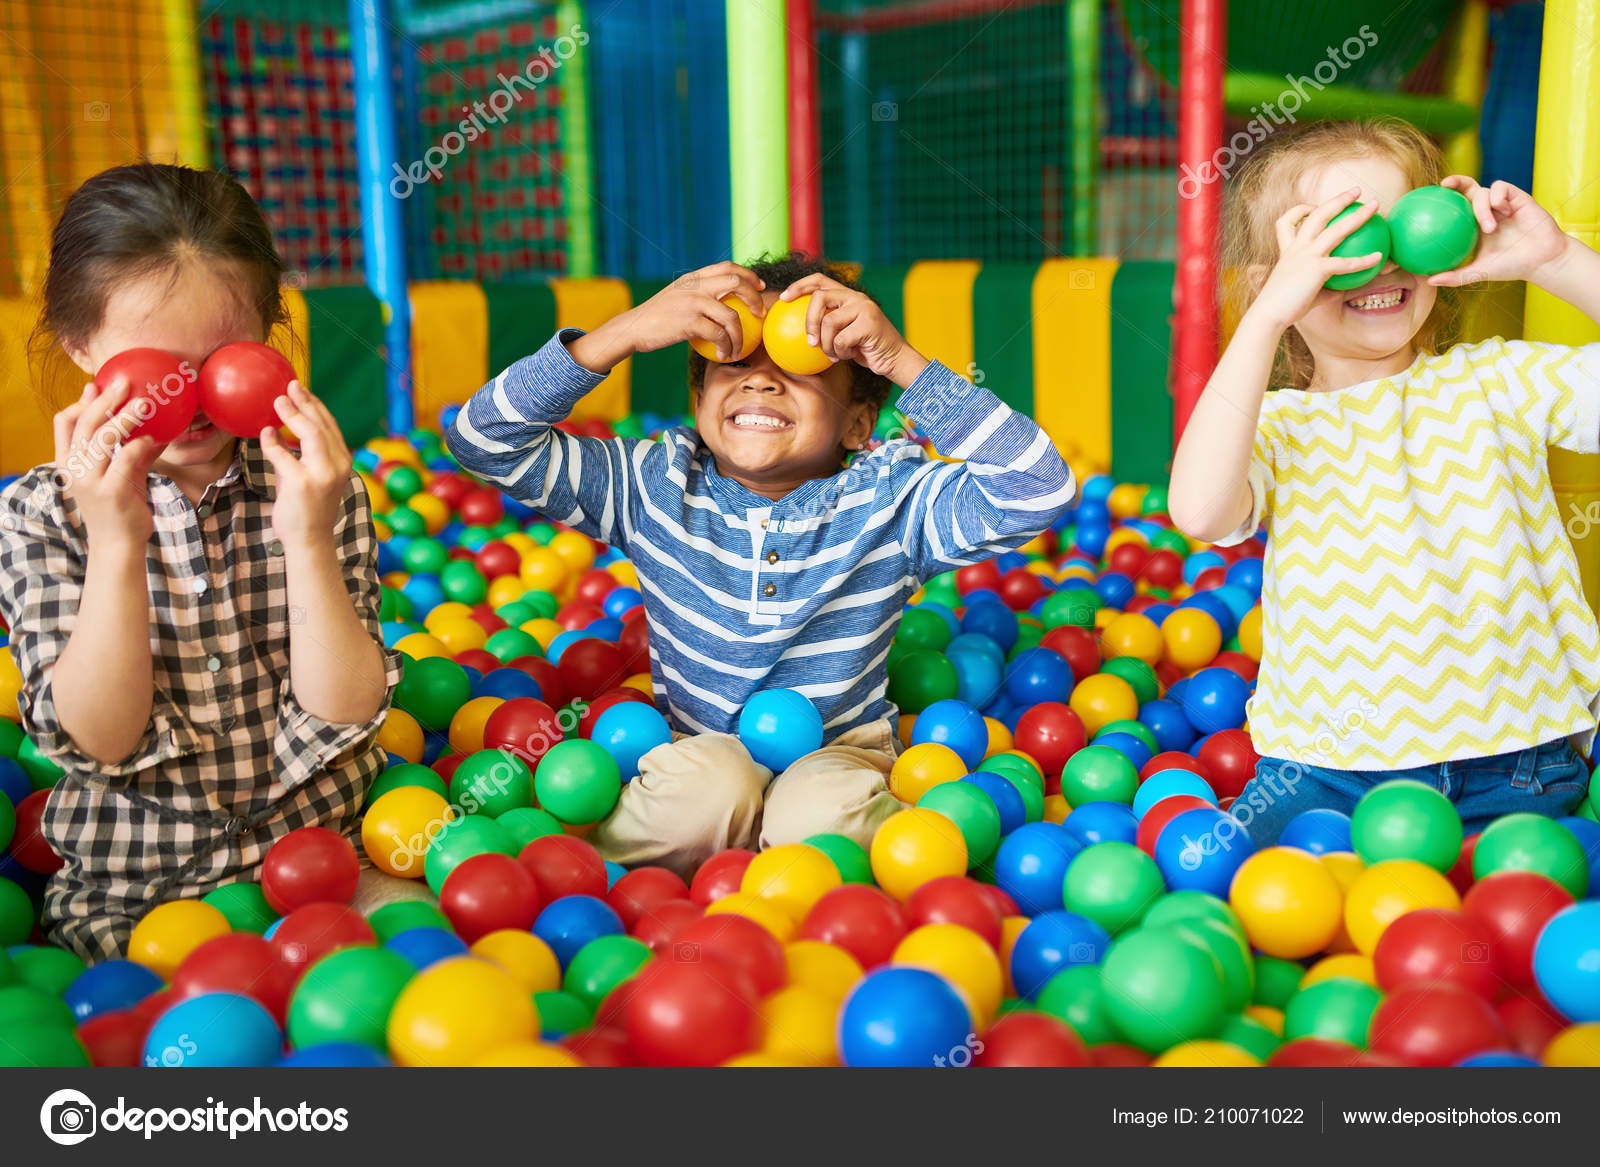 kids playing with balls